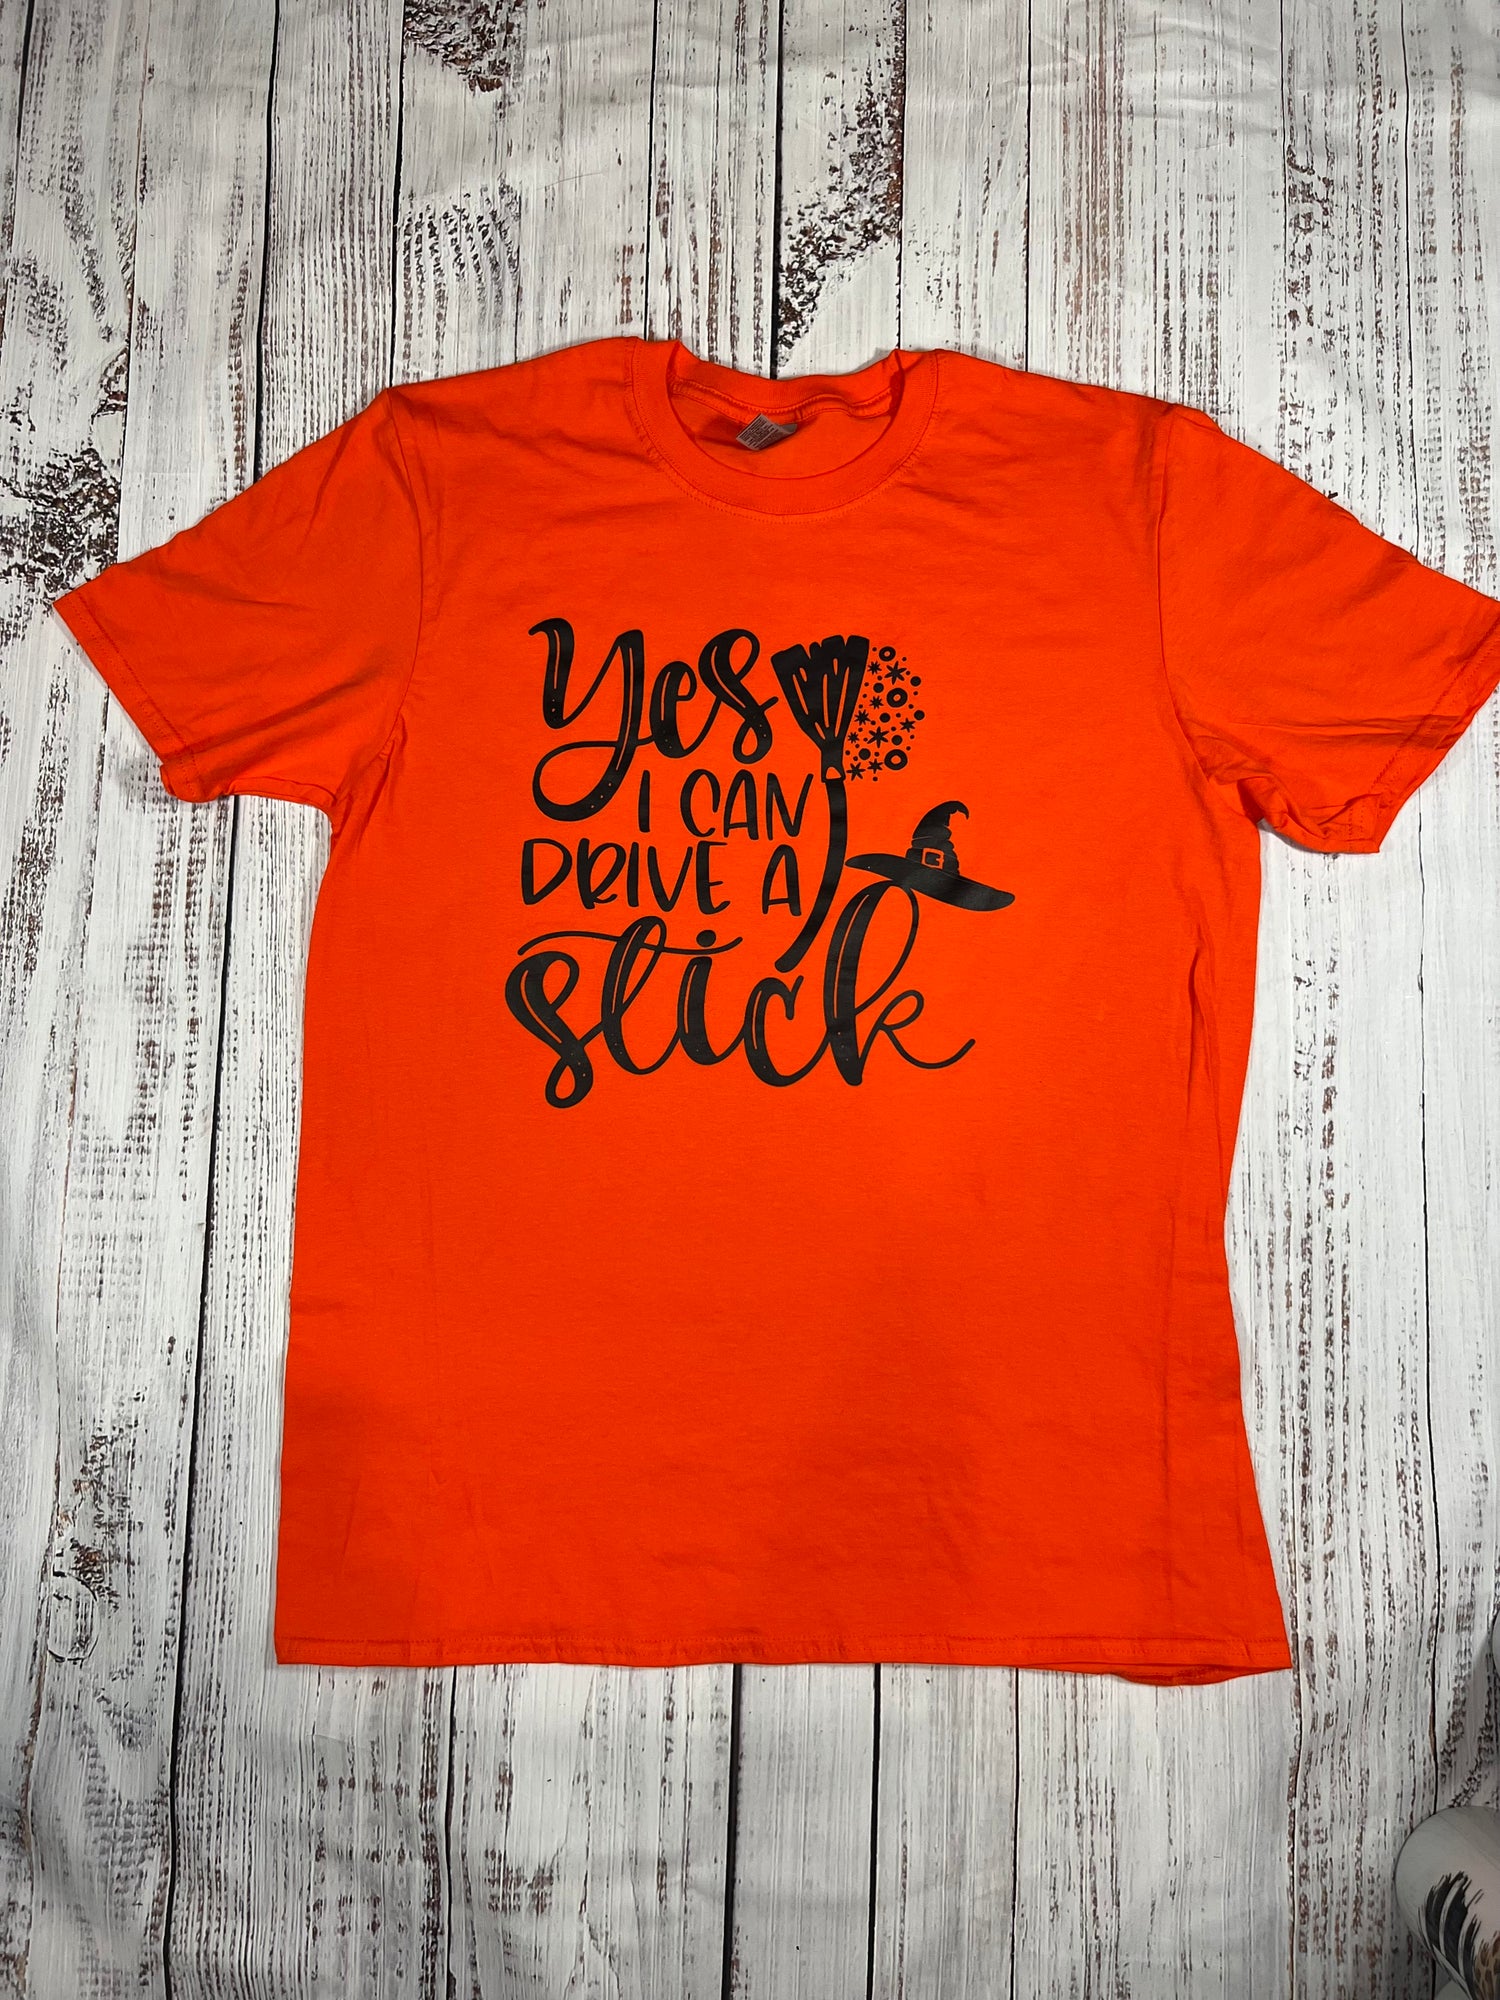 Yes, I Can Drive a Stick T-Shirt